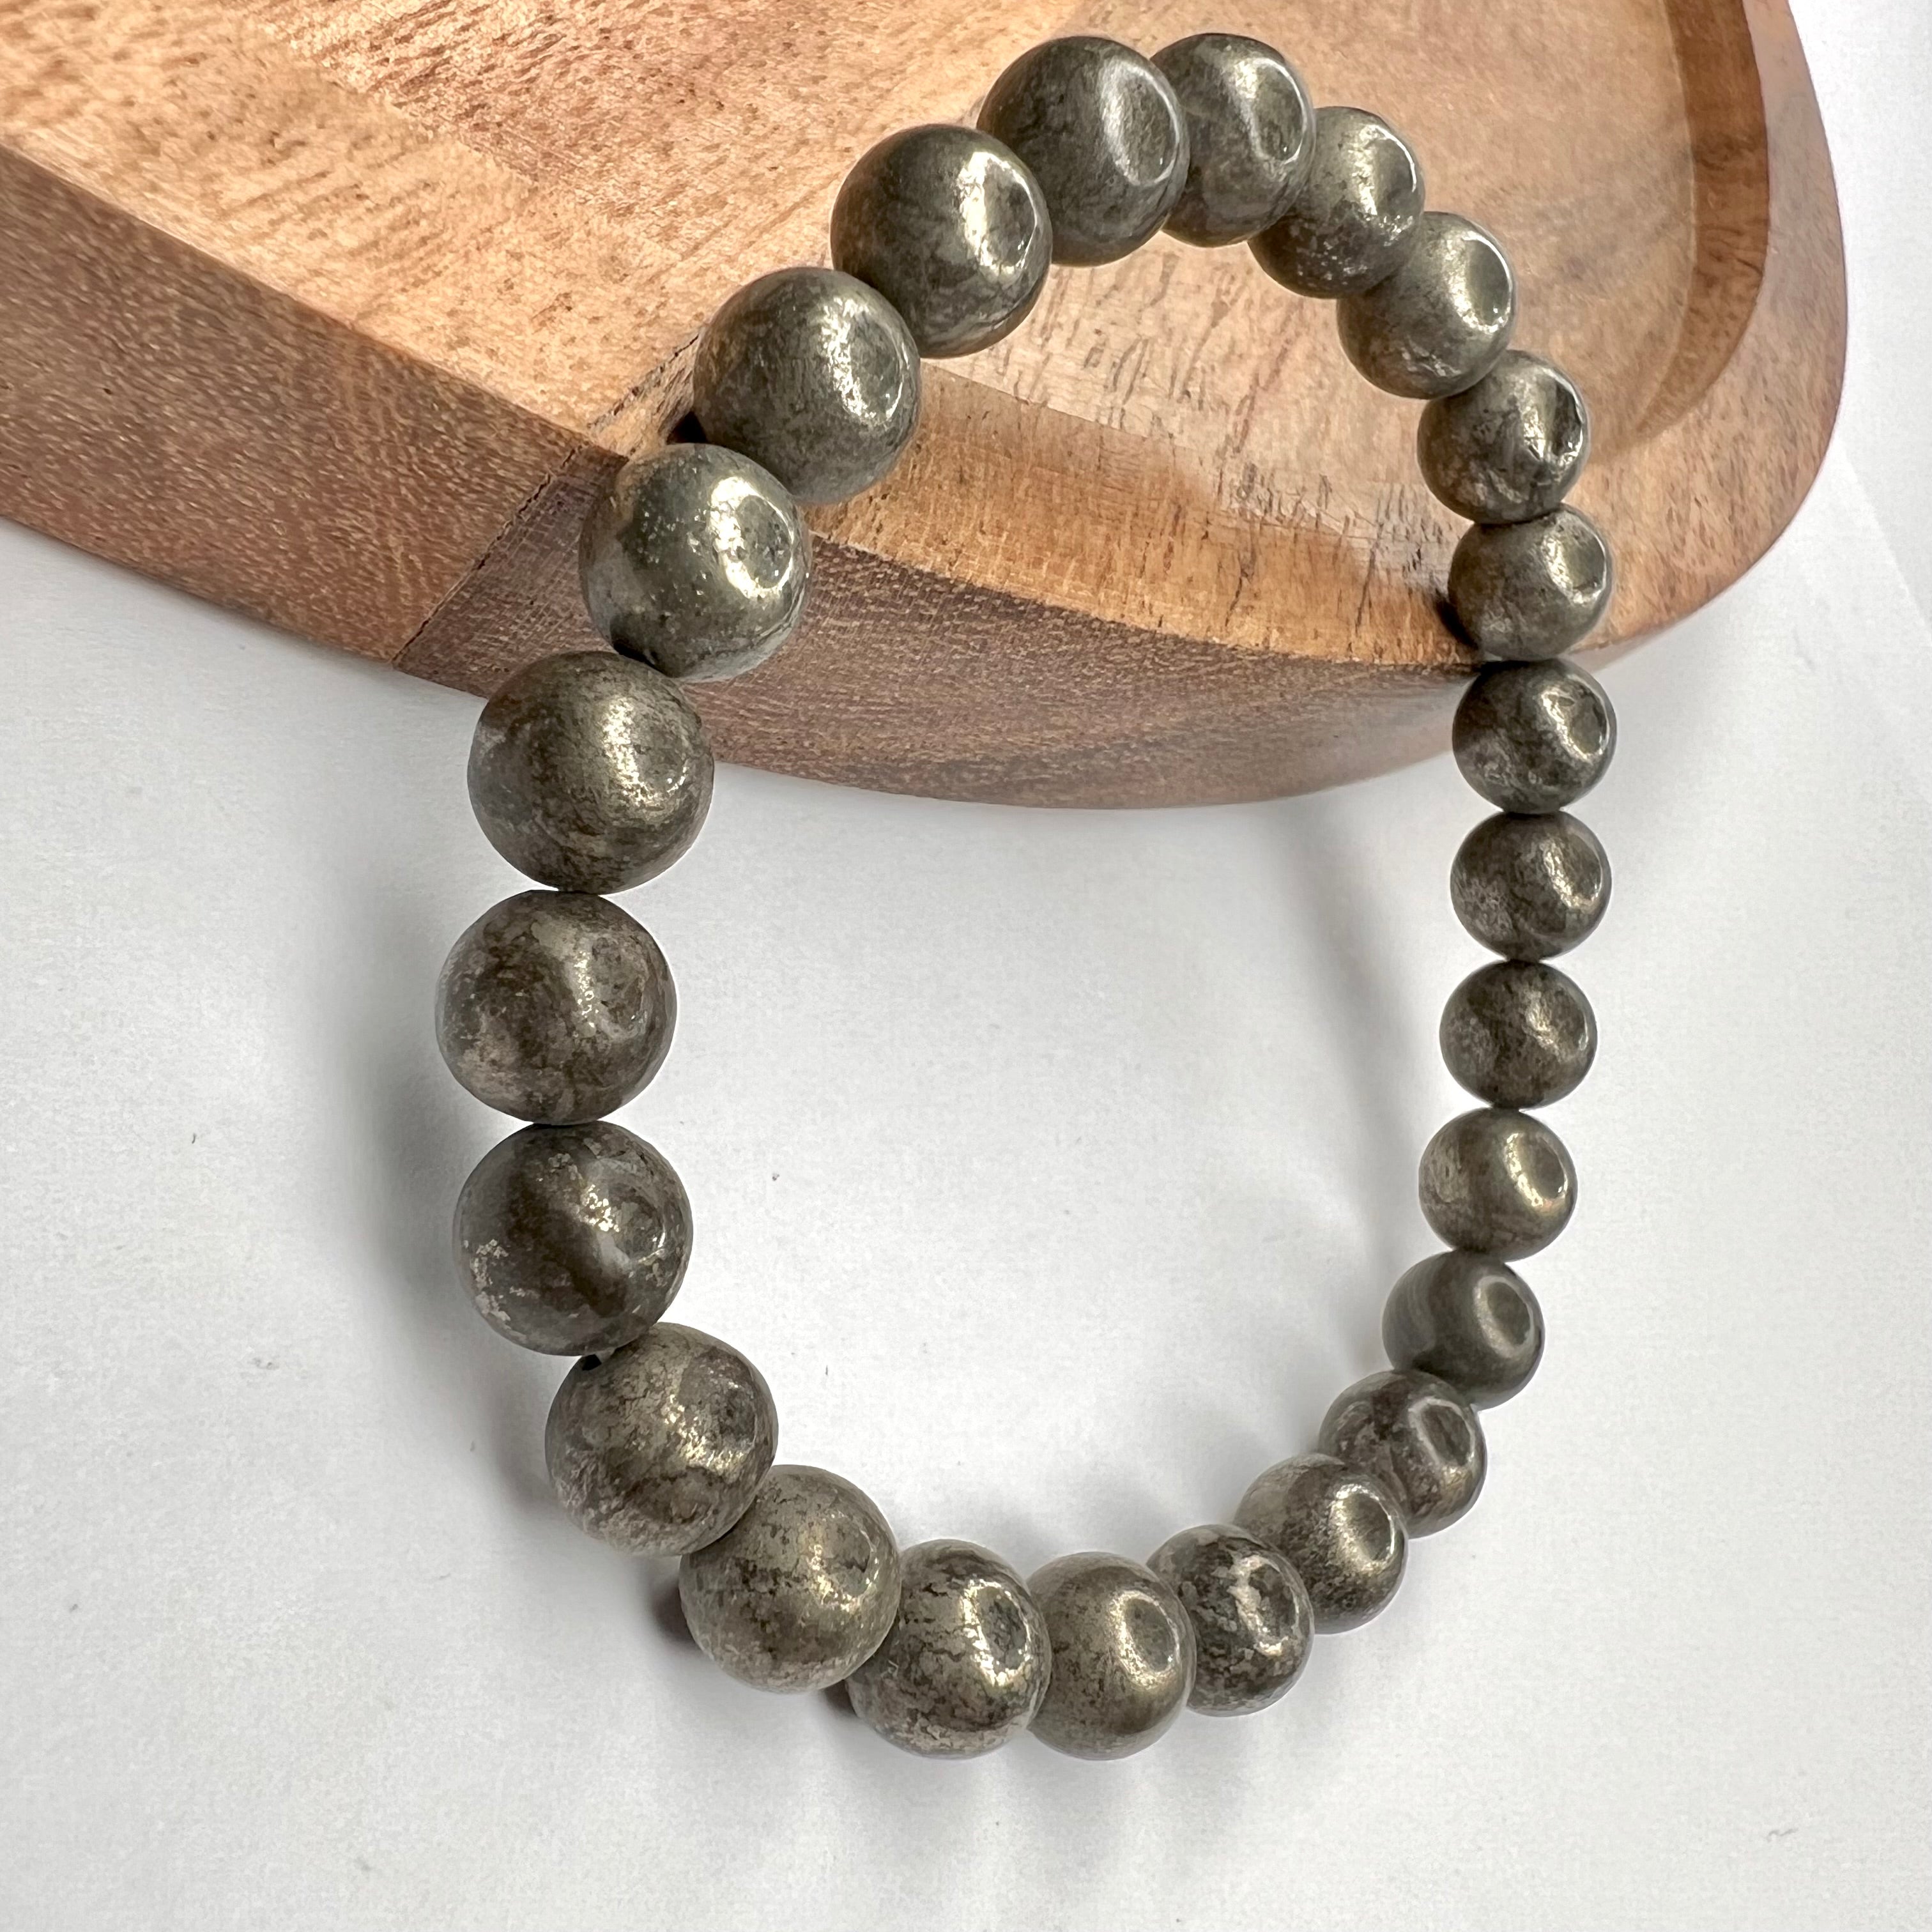 ￼PYRITE BRACELET - MONEY MAGNET AND CONFIDENCE BOOSTER